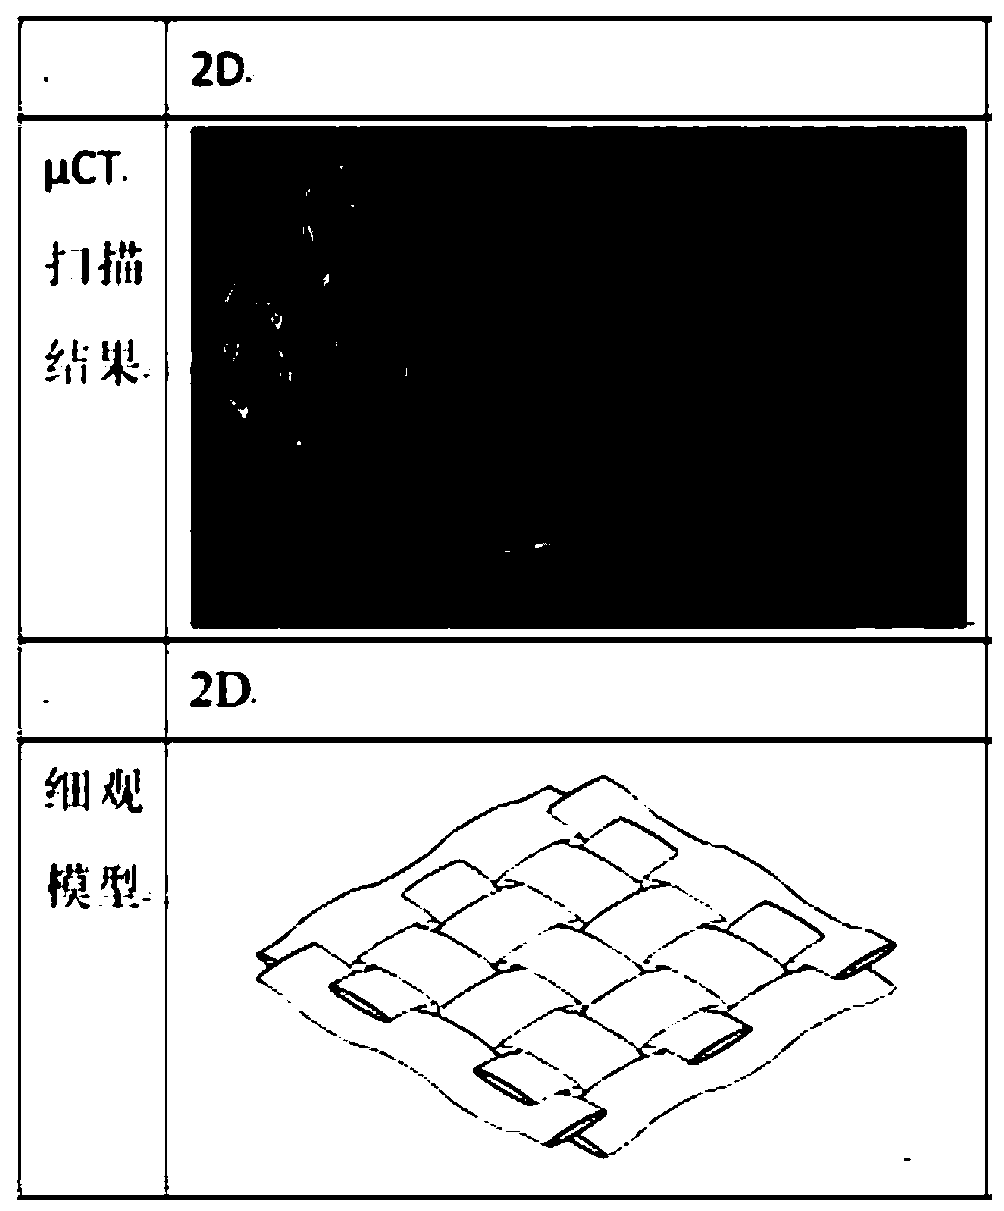 Rapid reconstruction method for microstructure of woven composite material based on topological characteristics